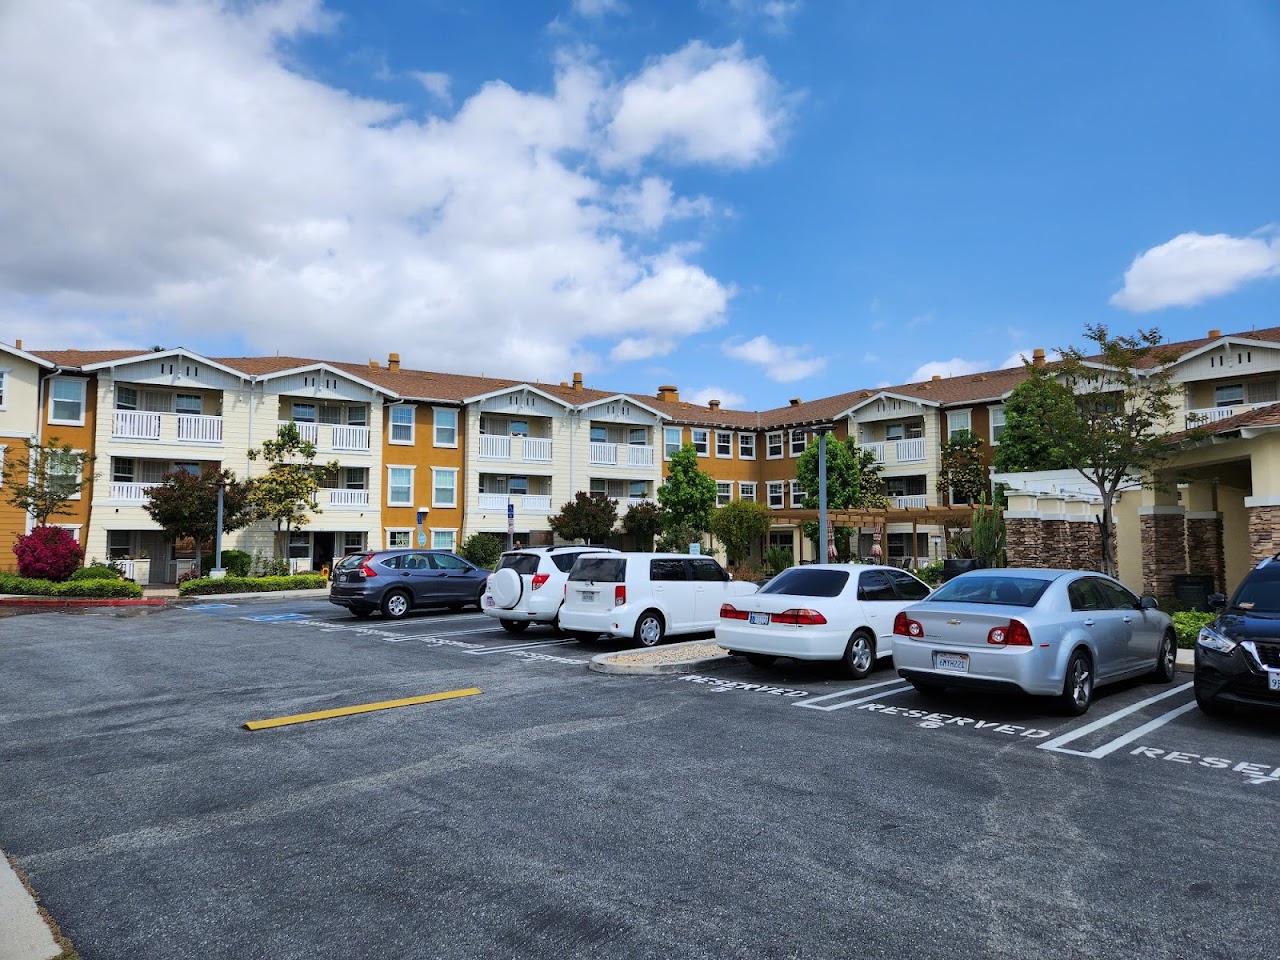 Photo of TYROL PLAZA SENIOR APTS. Affordable housing located at 891 S STATE COLLEGE BLVD ANAHEIM, CA 92806